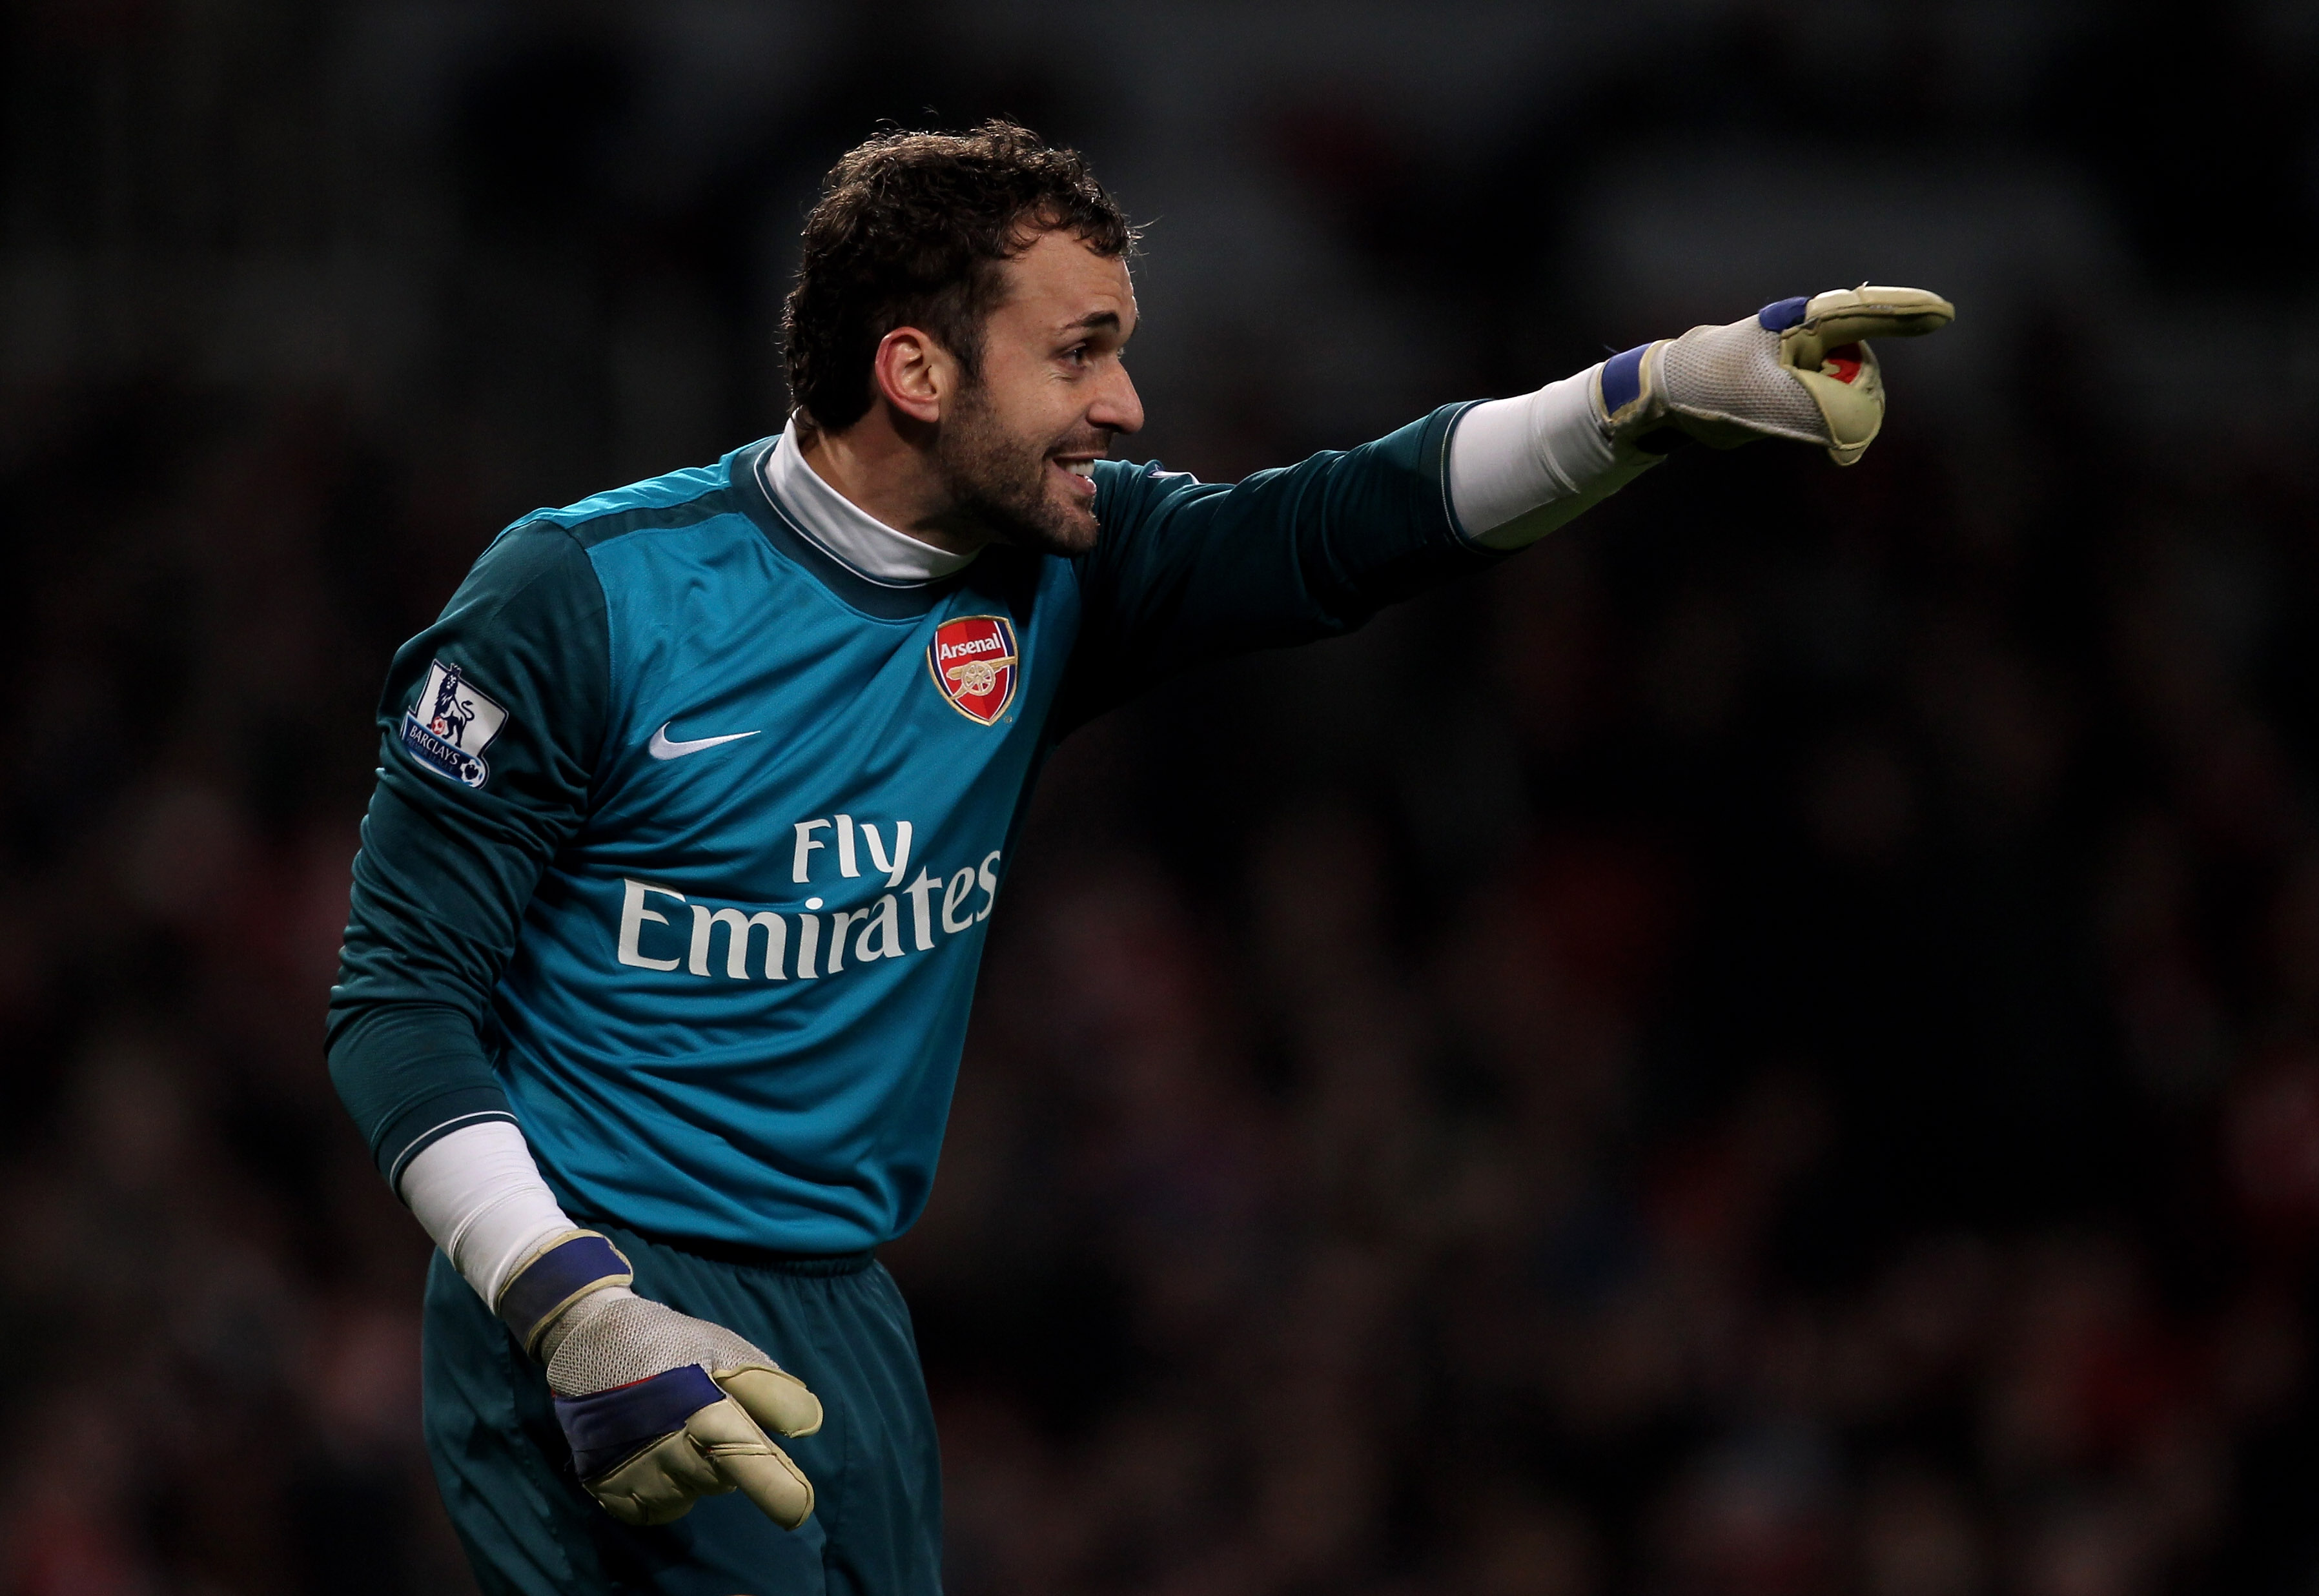 LONDON, ENGLAND - JANUARY 20:  Manuel Almunia, goalkeeper of Arsenal, gives instructions during the Barclays Premier League match between Arsenal and Bolton Wanderers at The Emirates Stadium on January 20, 2010 in London, England.  (Photo by Julian Finney